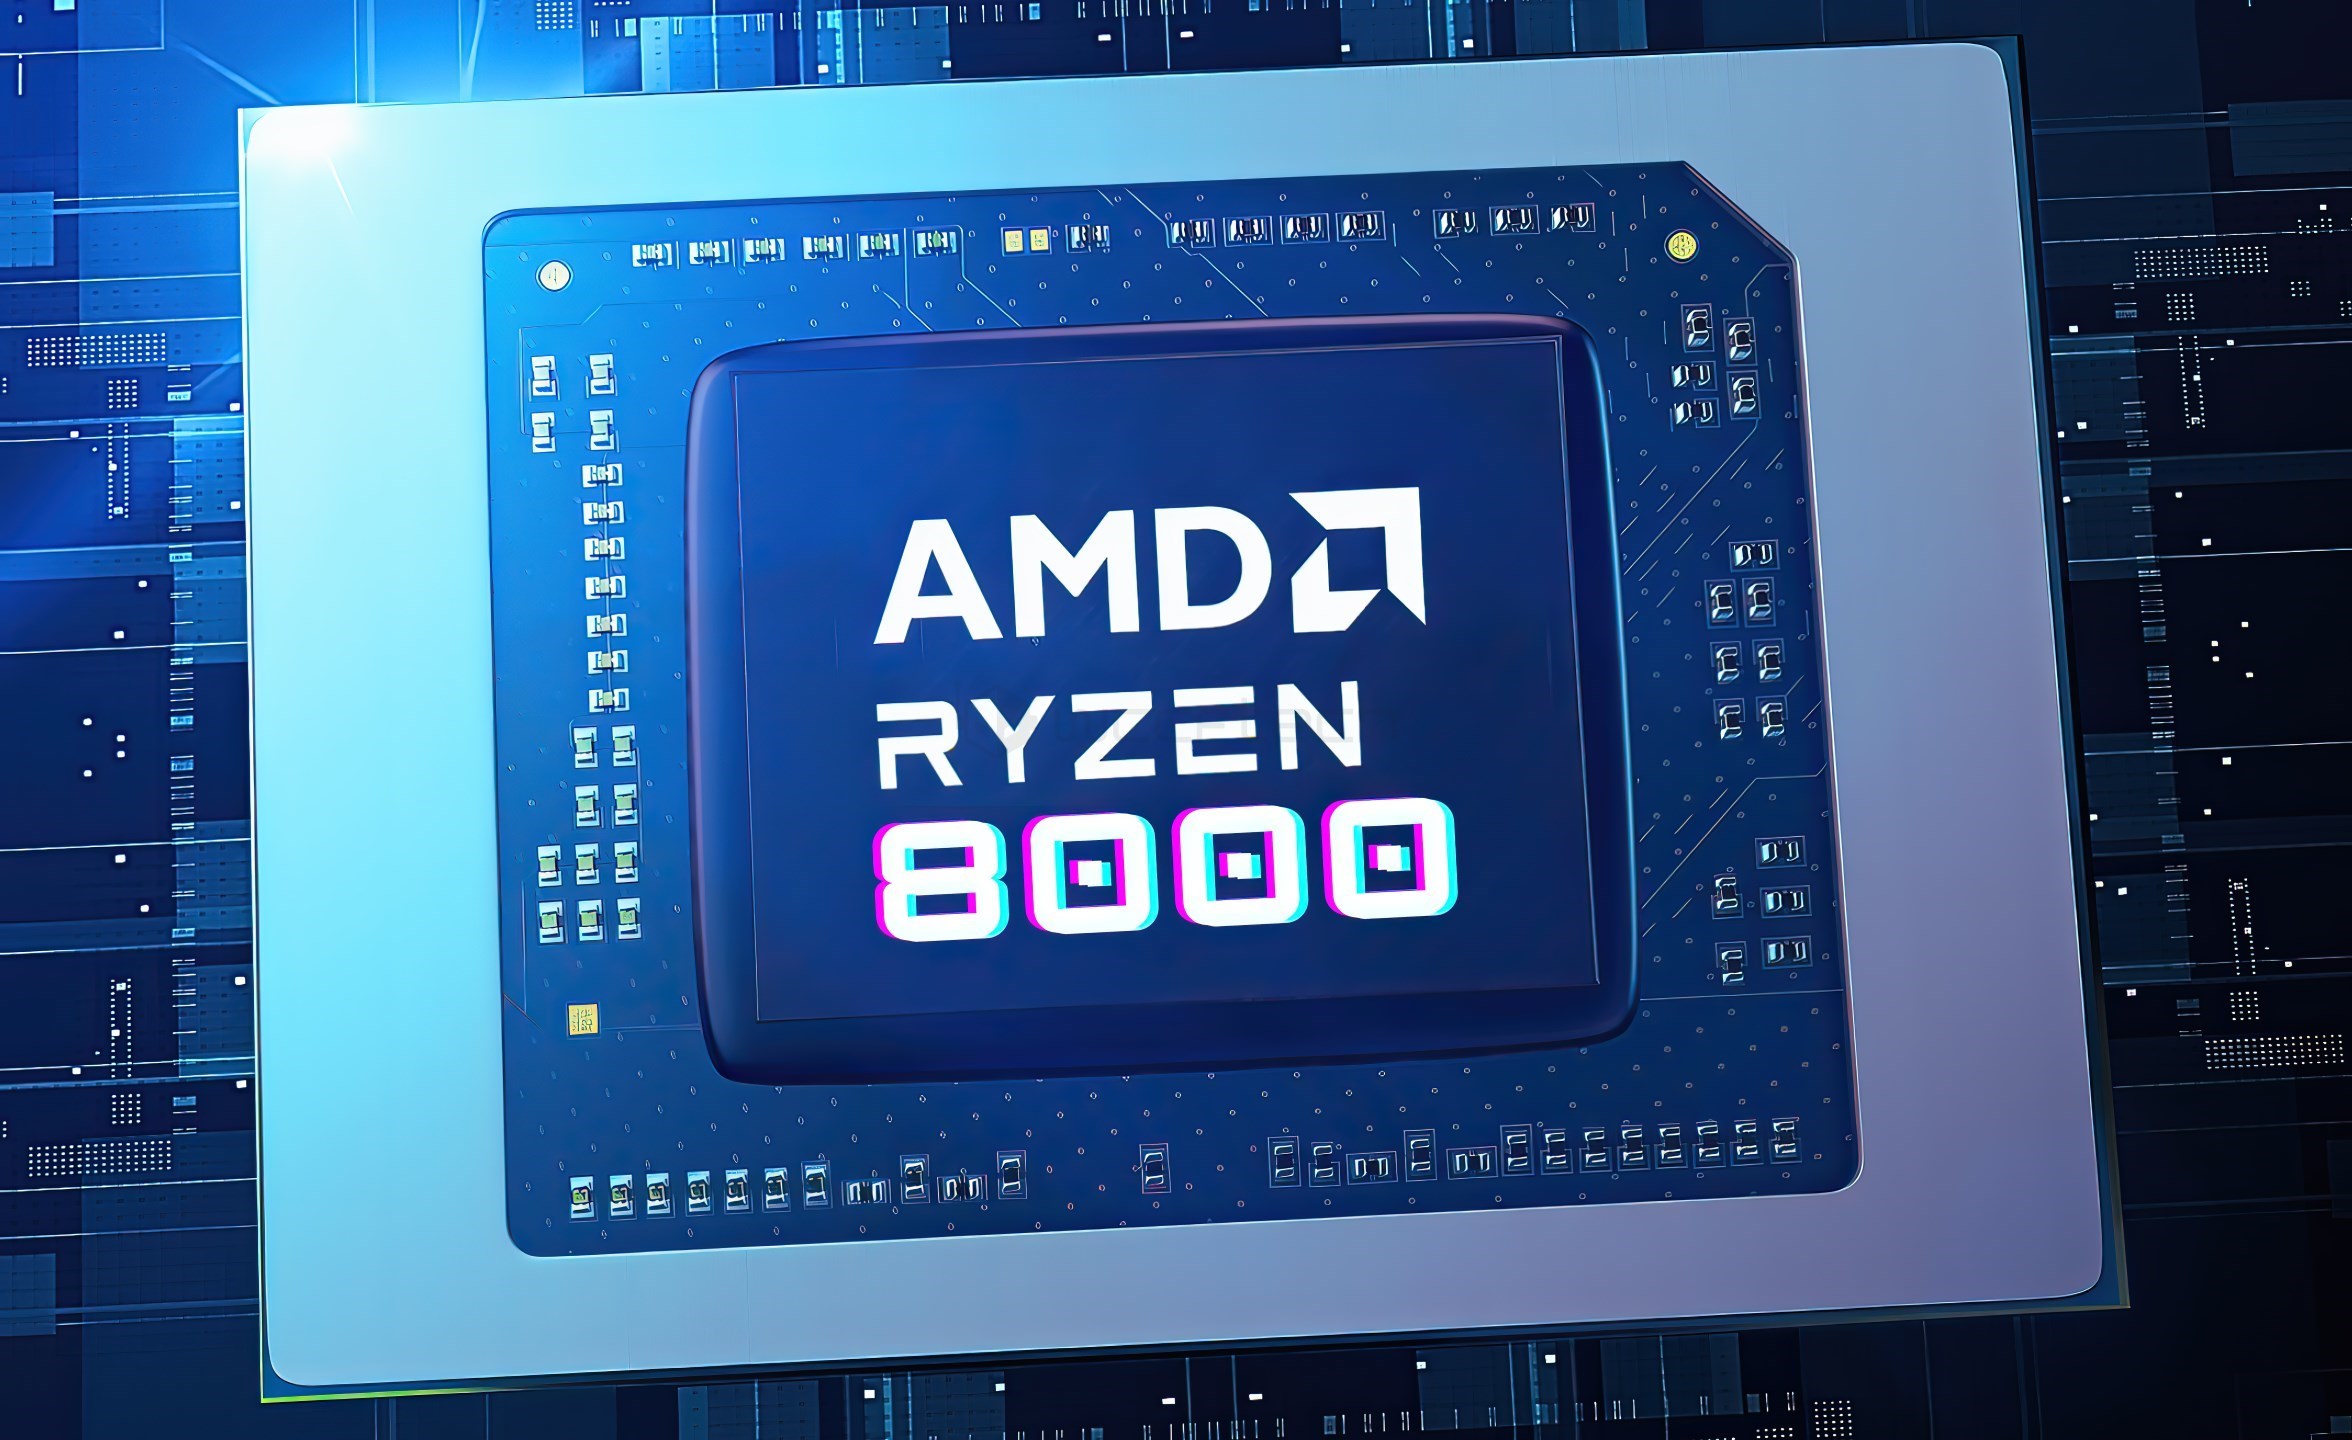 AMD unveils the new Ryzen 7 8700F and Ryzen 5 8400F processors for global sale.